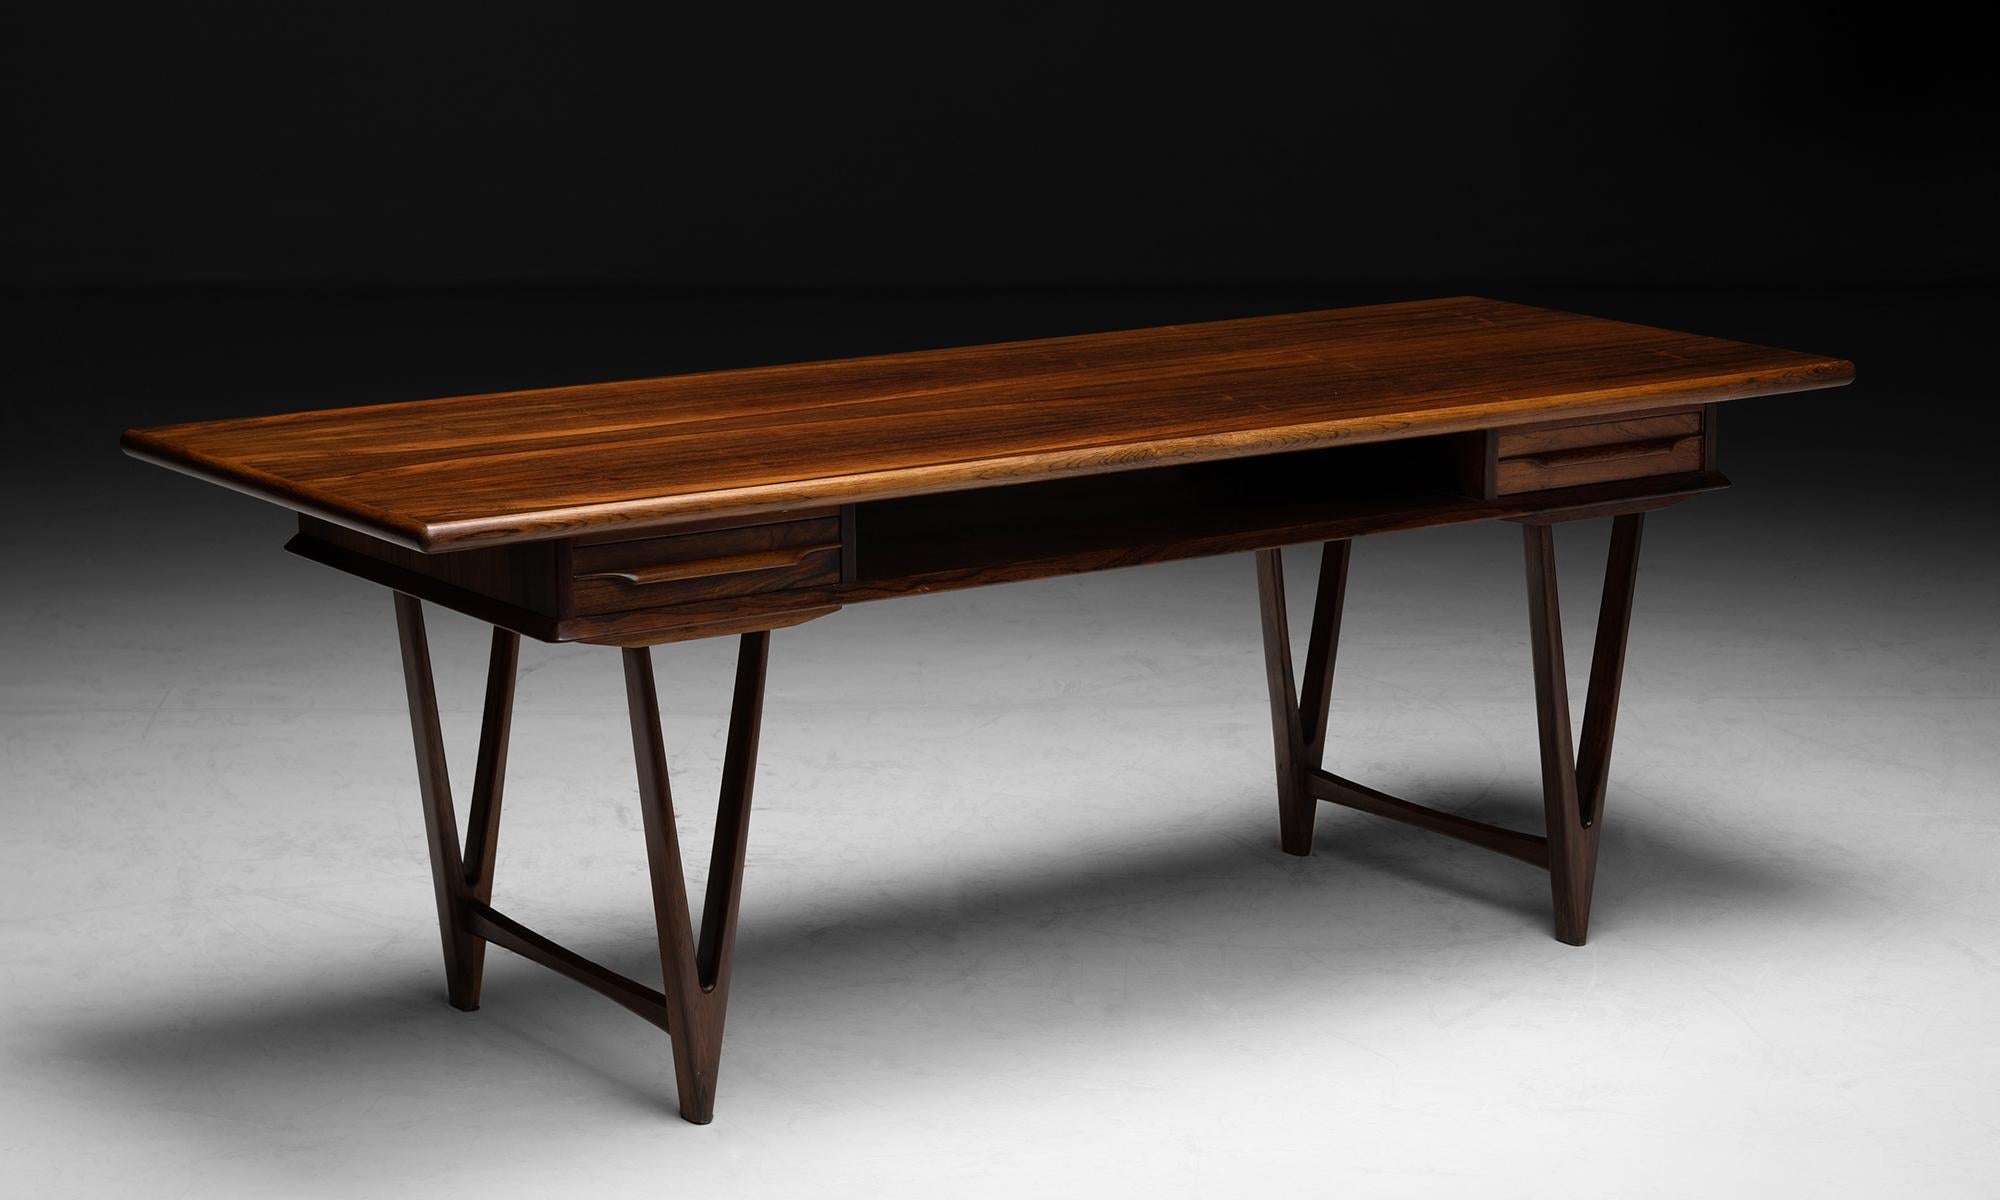 Kurt Ostervig coffee table

Denmark circa 1960

Constructed in solid and veneered Gonçalo alves wood.

Measures: 57”L x 21.75”D x 20.75”H.